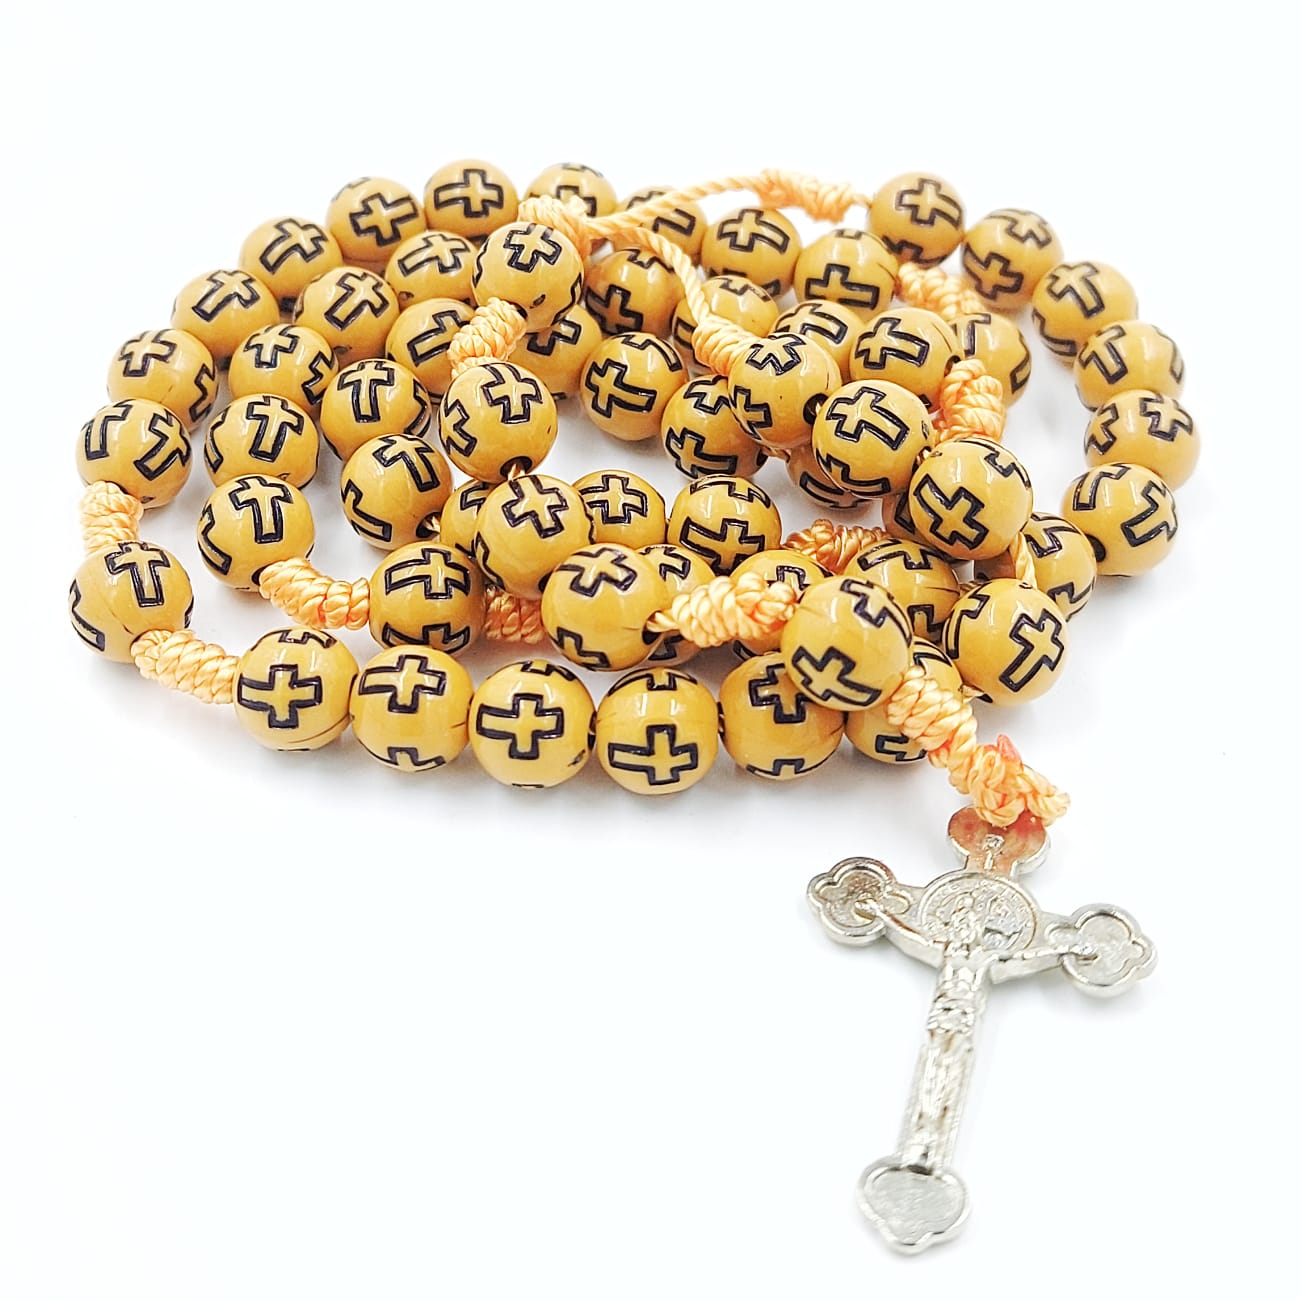 6mm Cross Beads Thread Rosary with Metal Crucifix-Wood-R148